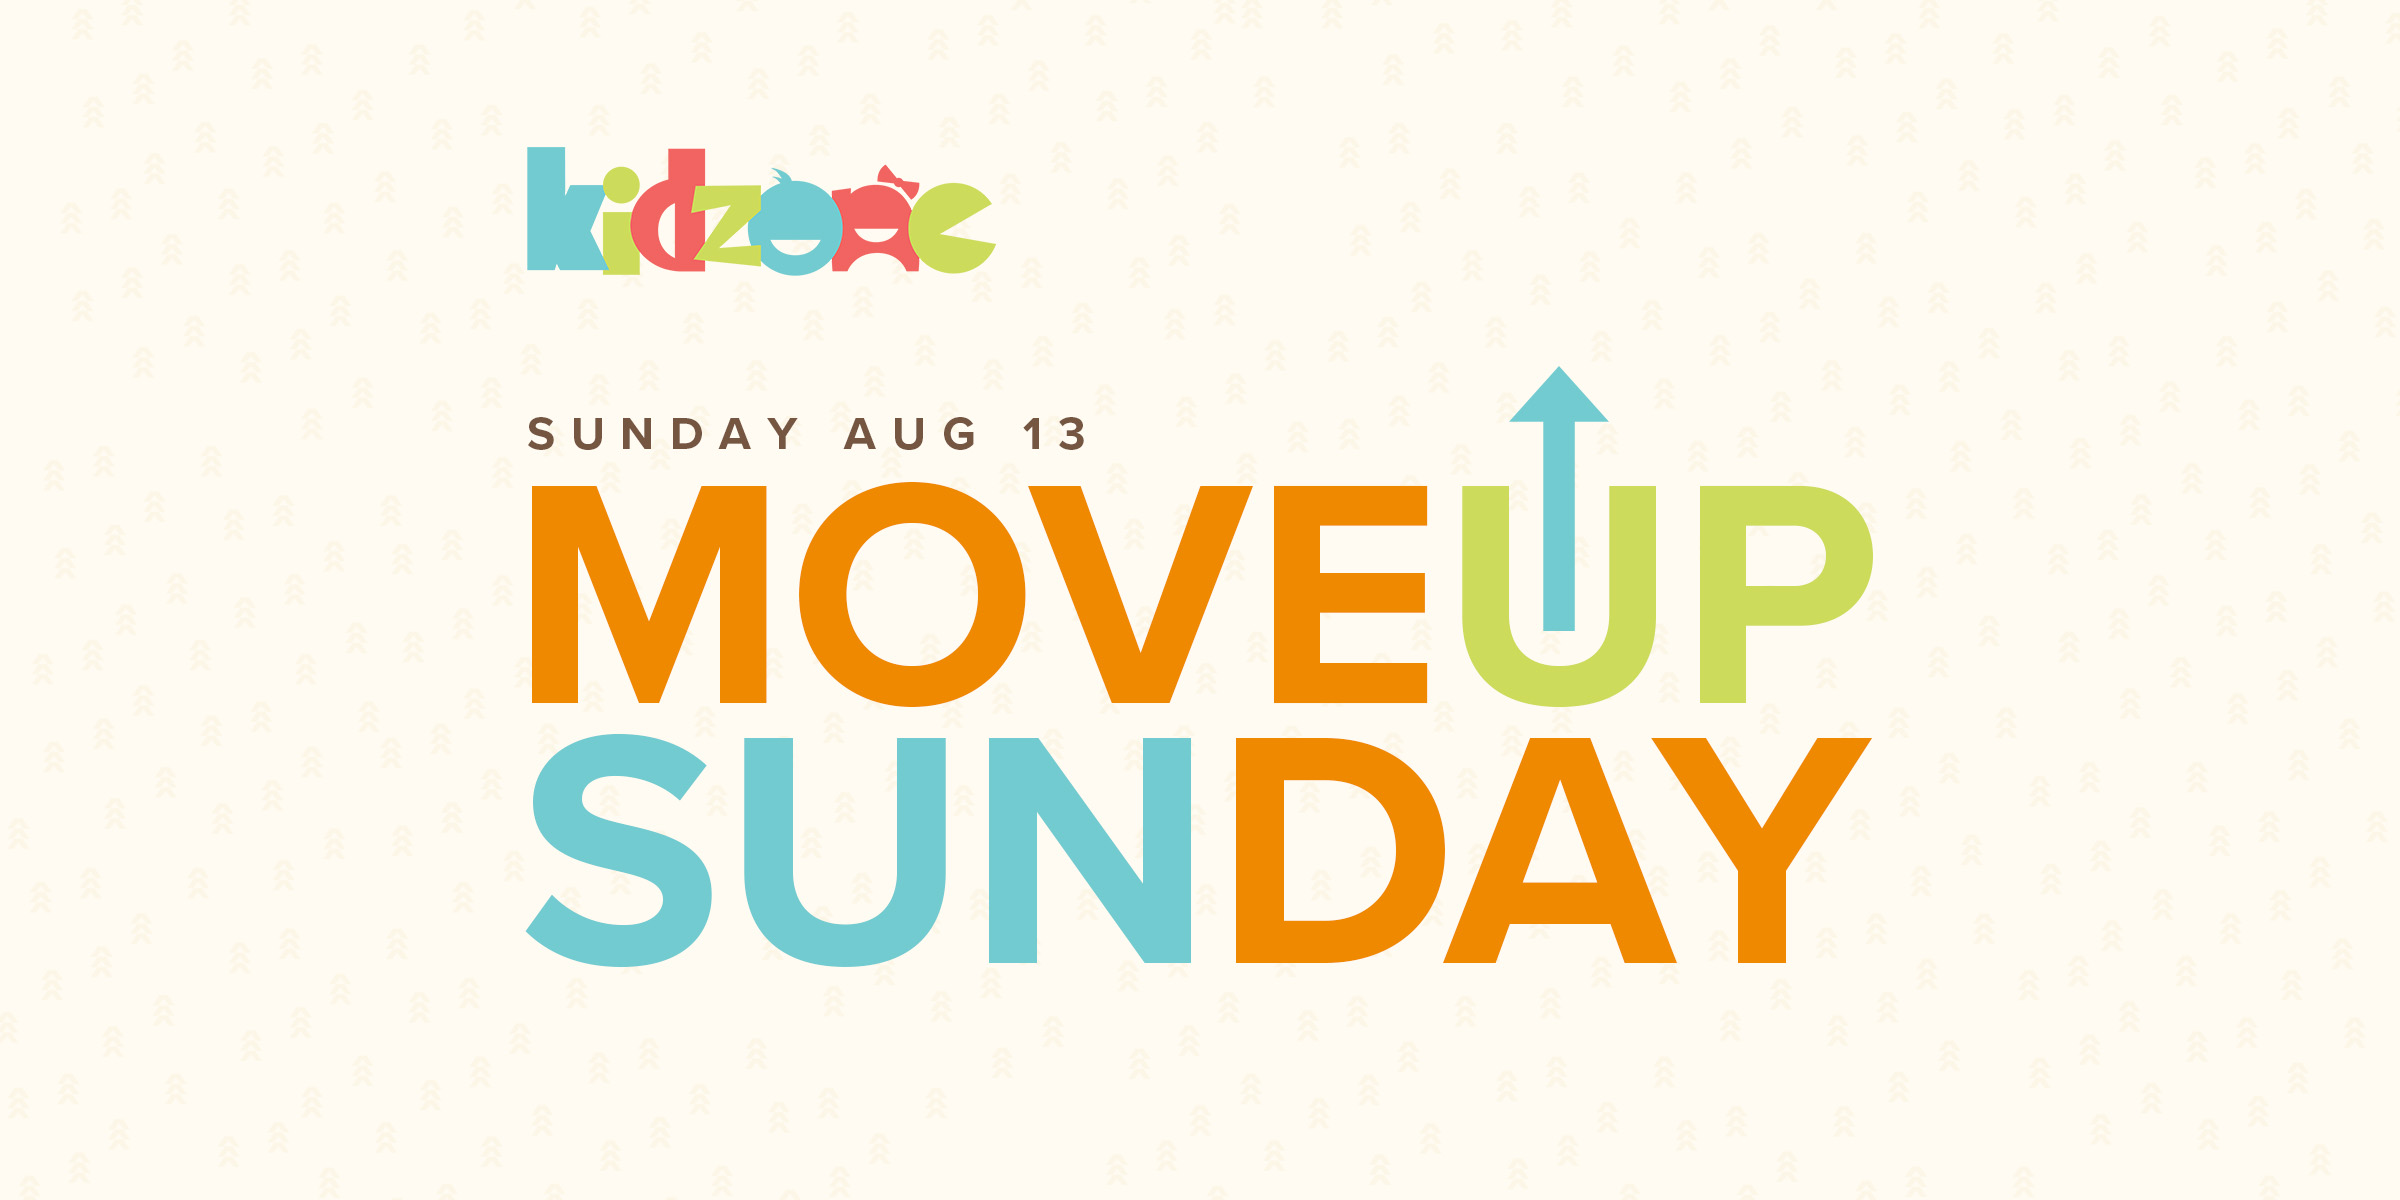 KidZone "Move Up Sunday" is August 13th